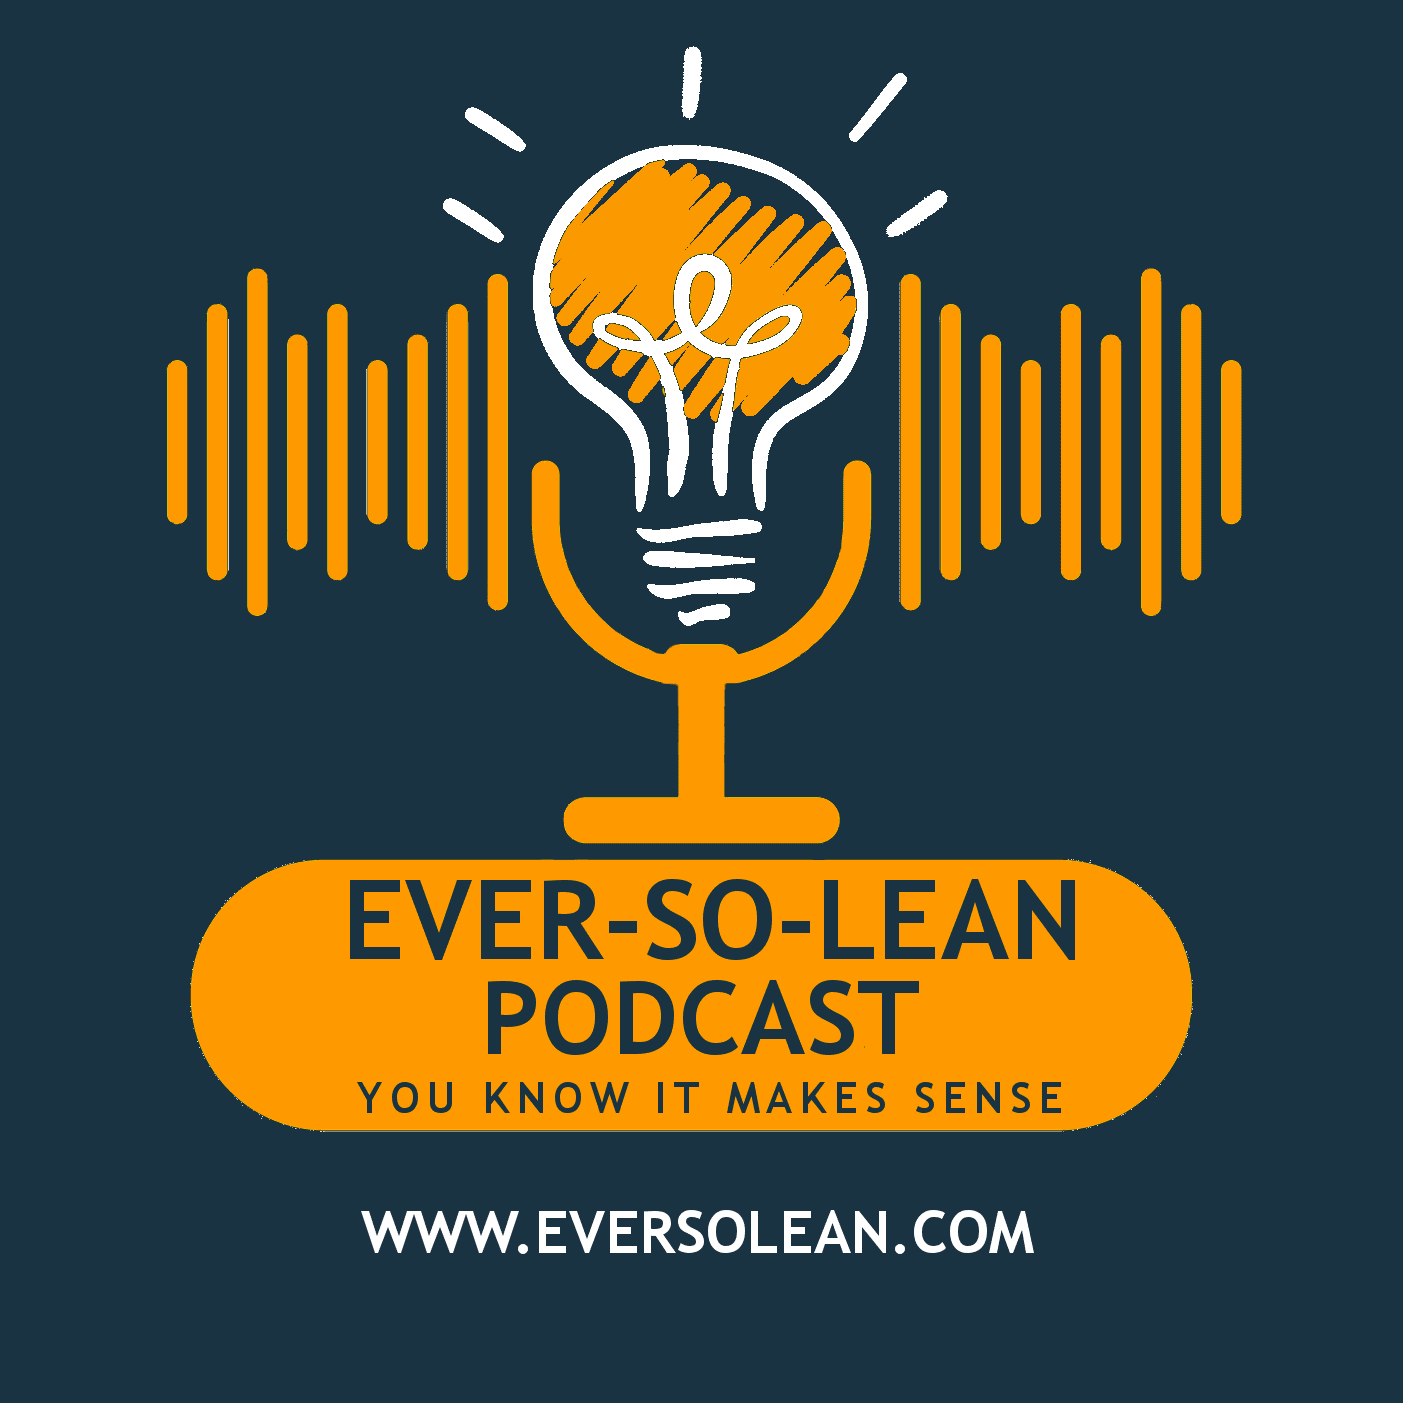 Ever-So-Lean Podcast